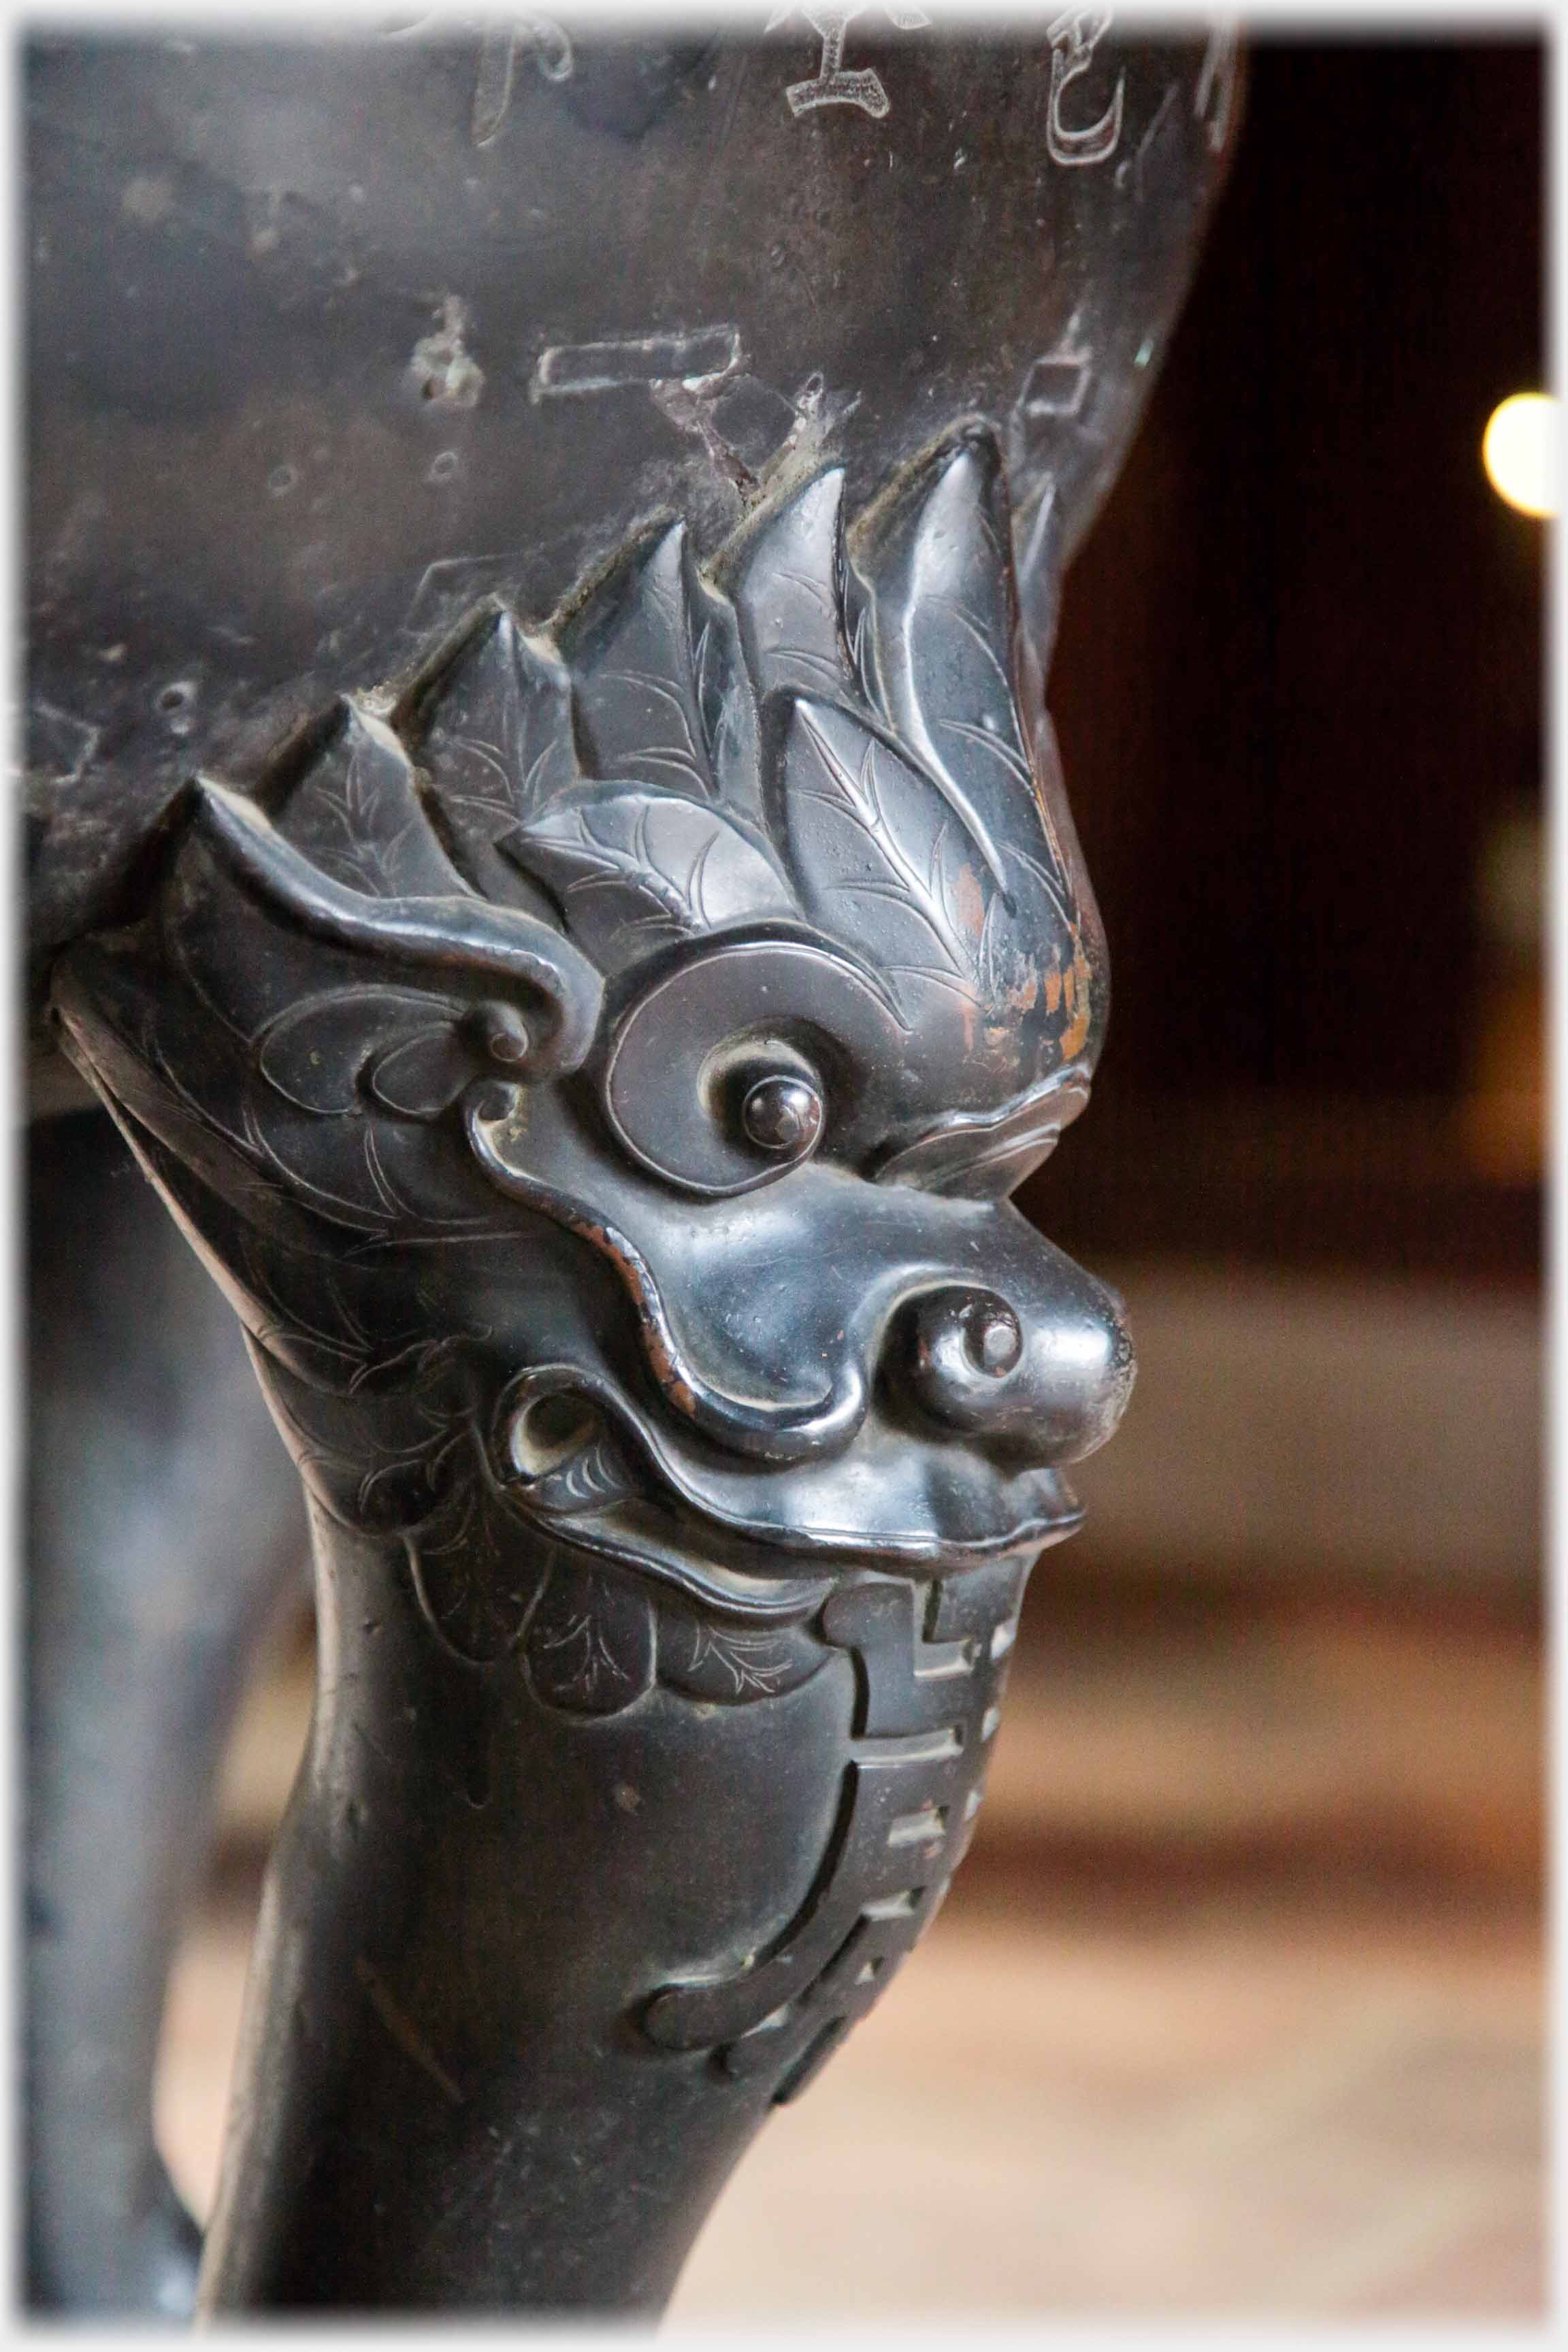 Close up of top of urn leg showing creature's face.